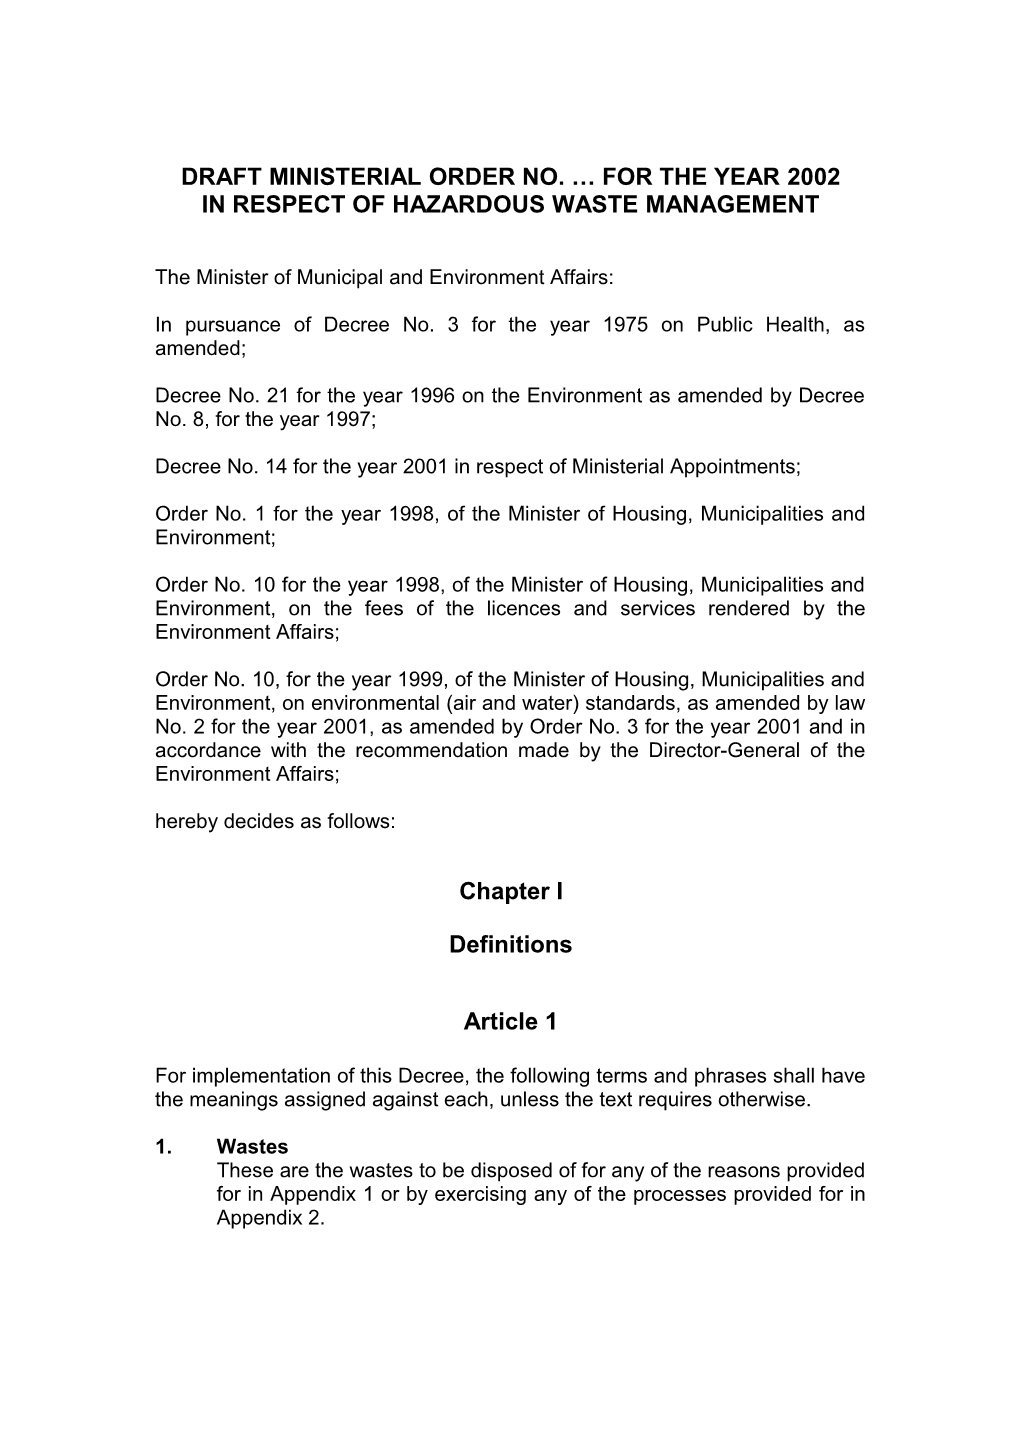 Draft Ministerial Order No. for the Year 2002